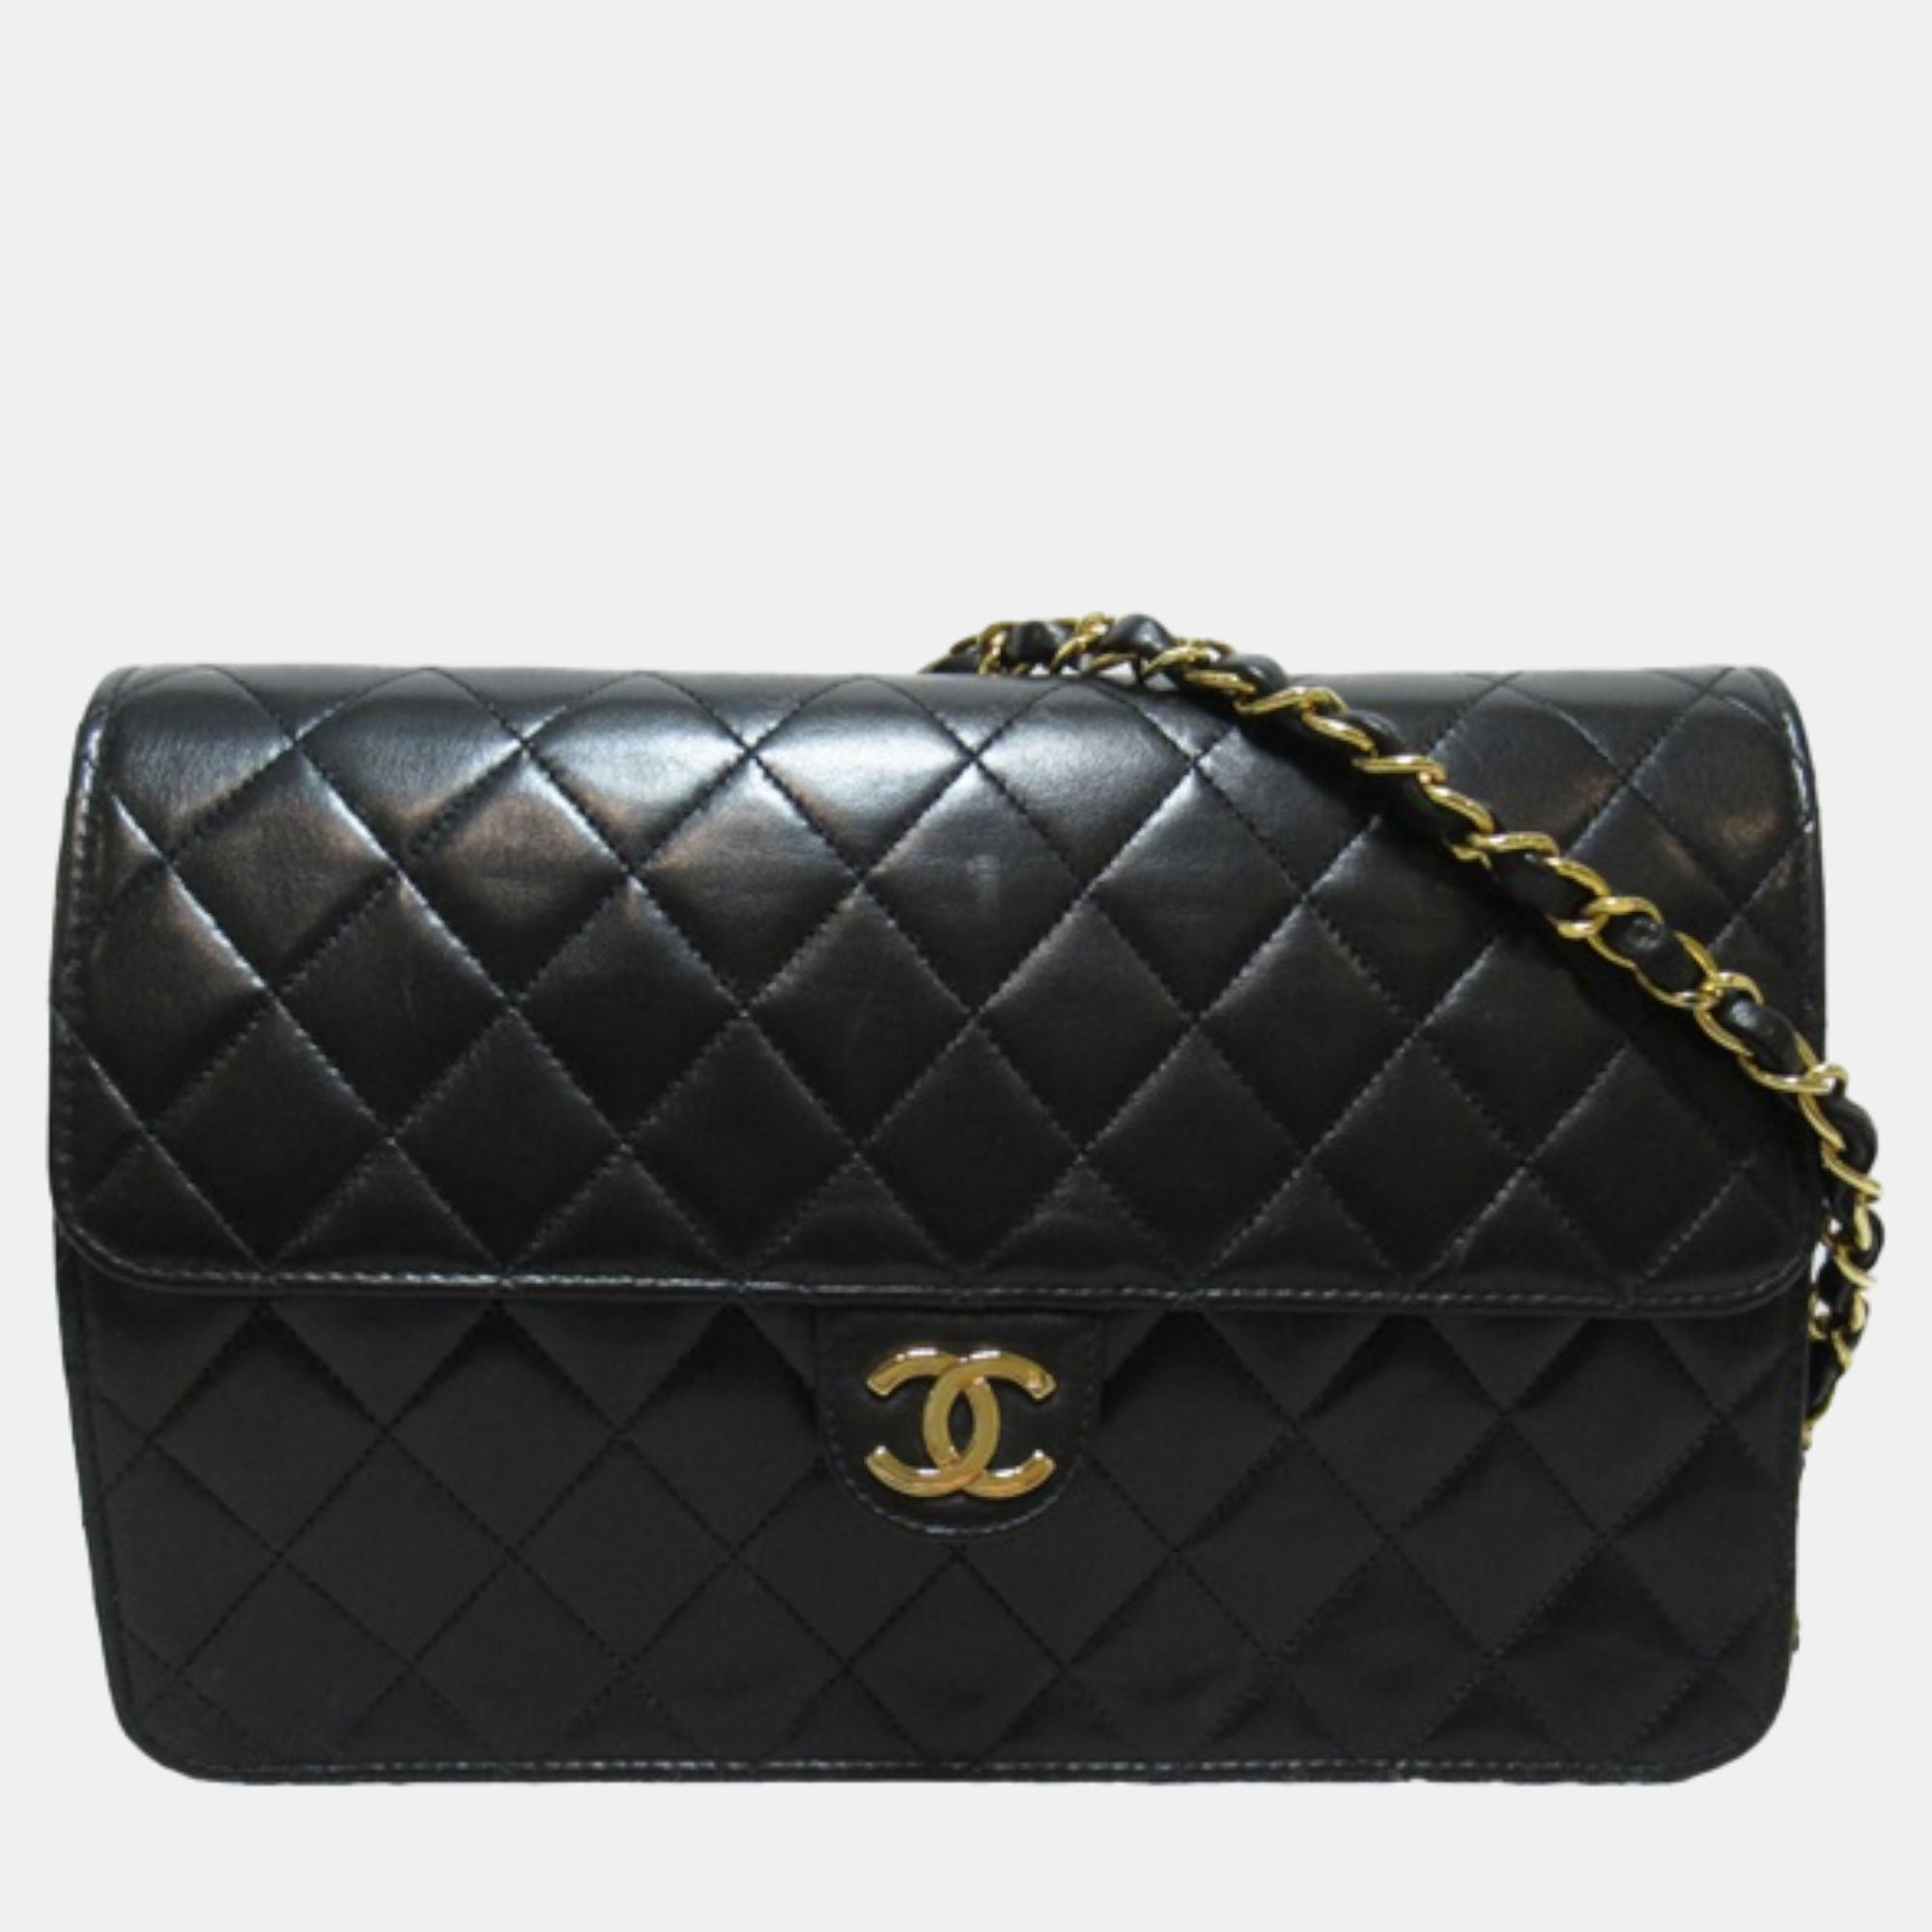 Chanel black leather quilted cc flap crossbody bag